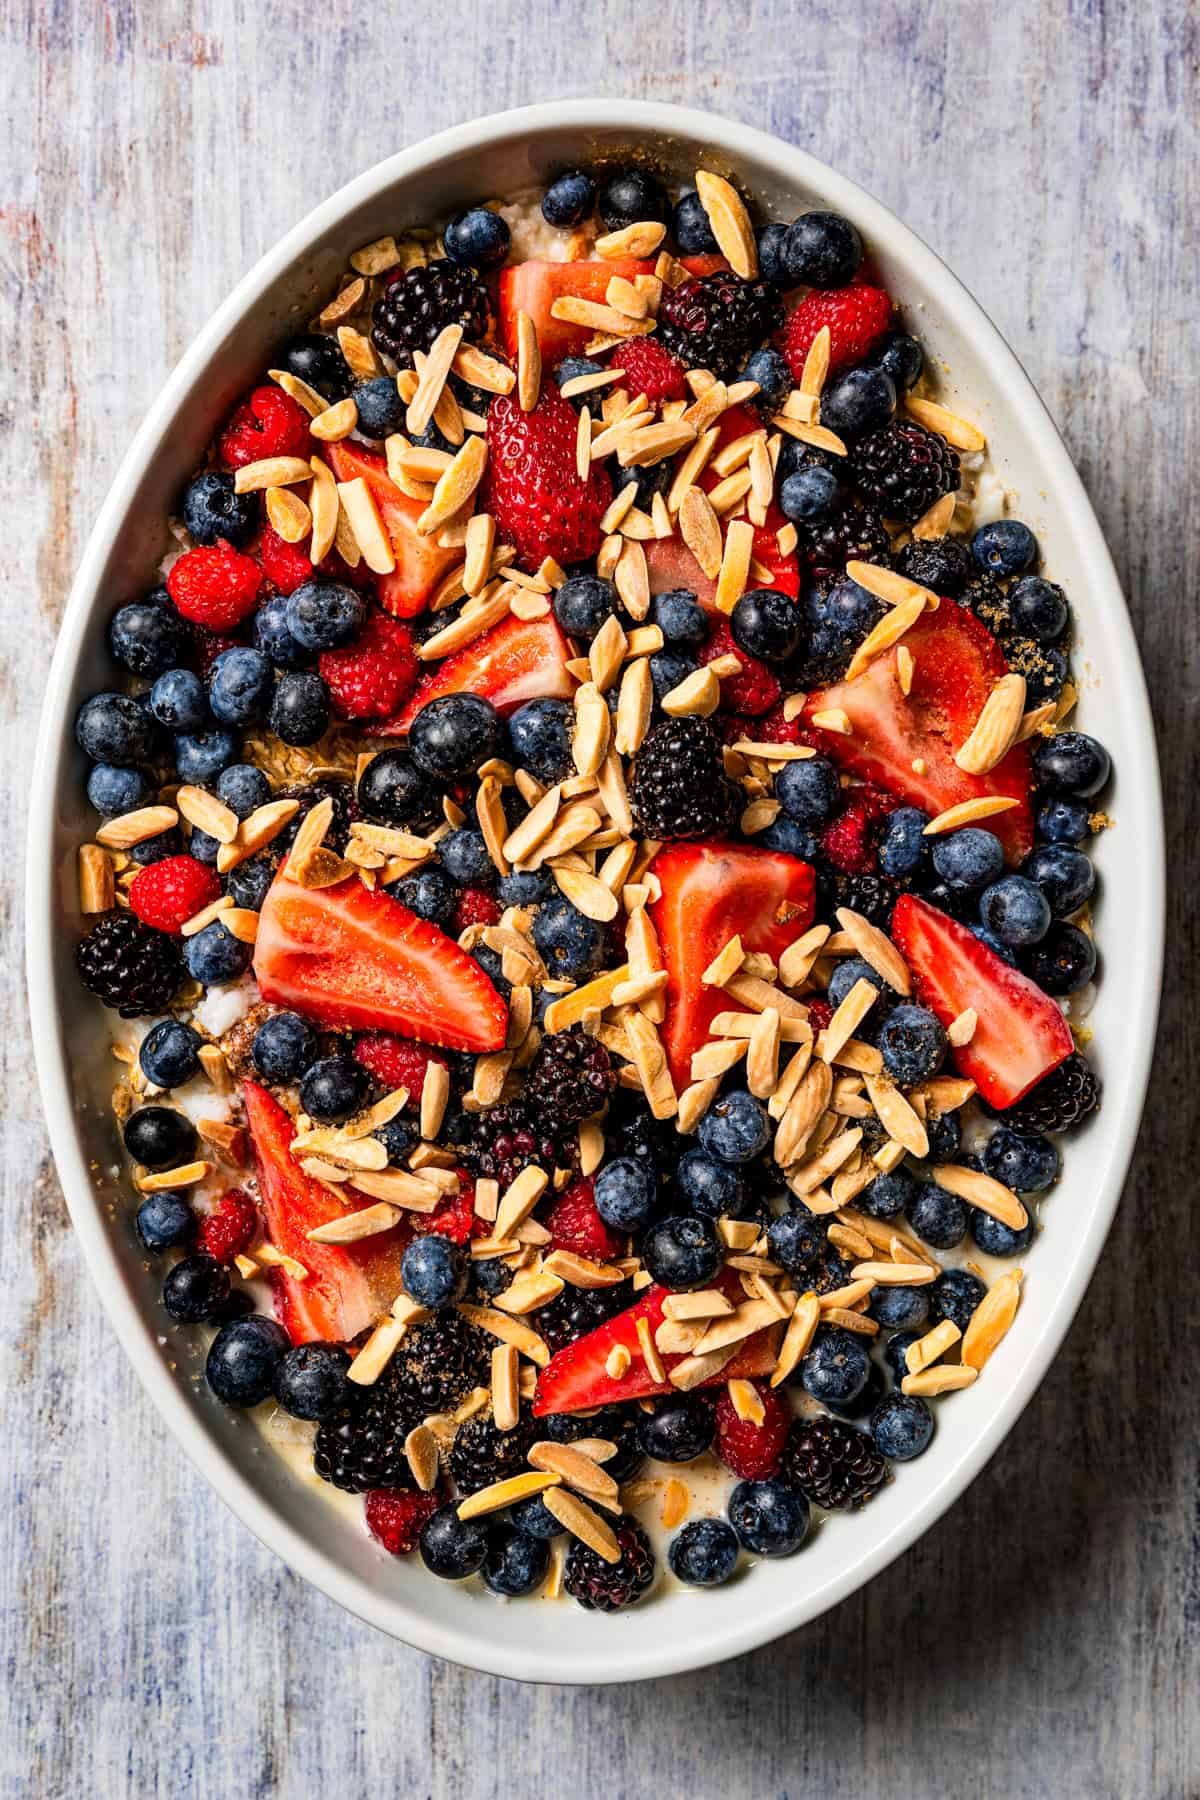 Assembled oatmeal tossed with berries and arranged in an oval casserole dish.